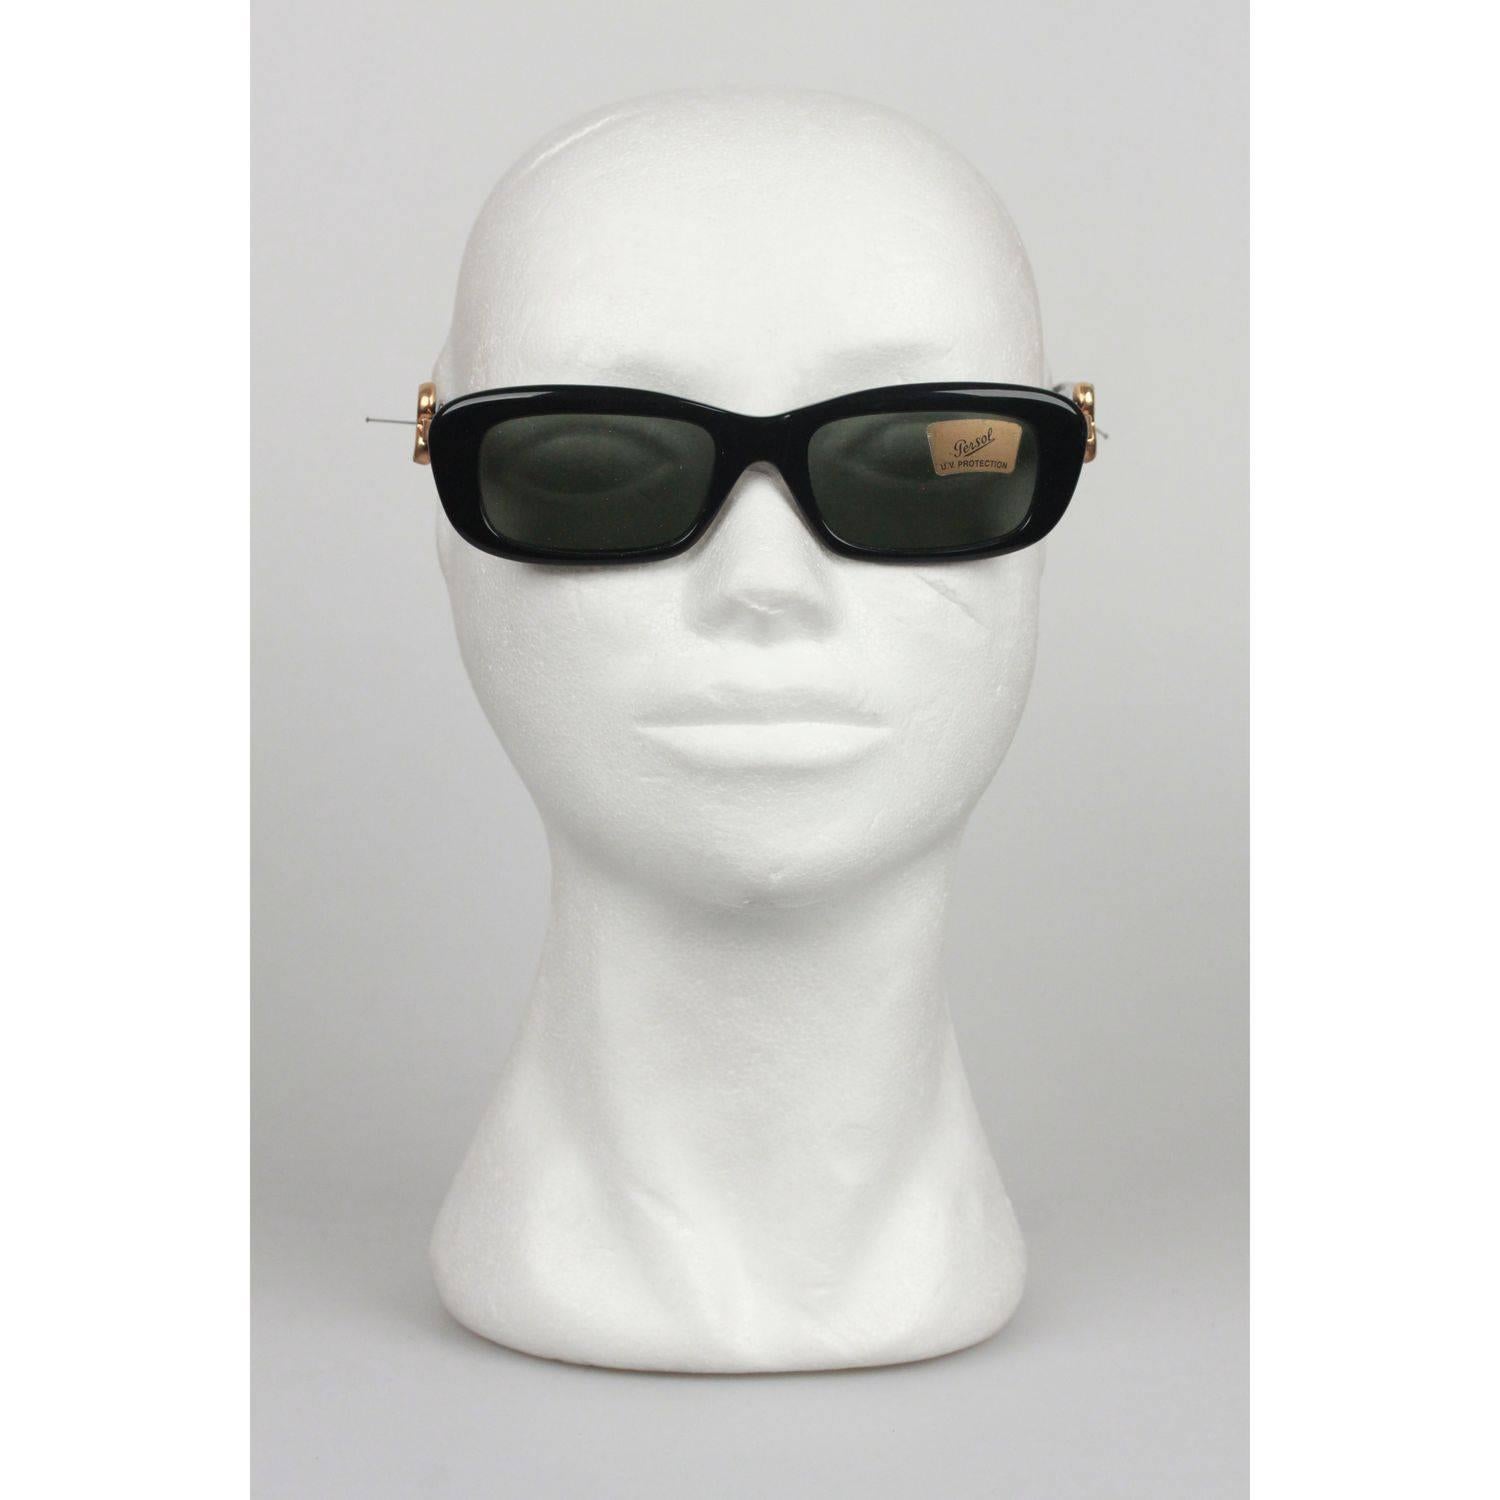 MOSCHINO by PERSOL Vintage Black MINT SUNGLASSES MC824 53mm HEARTS 1